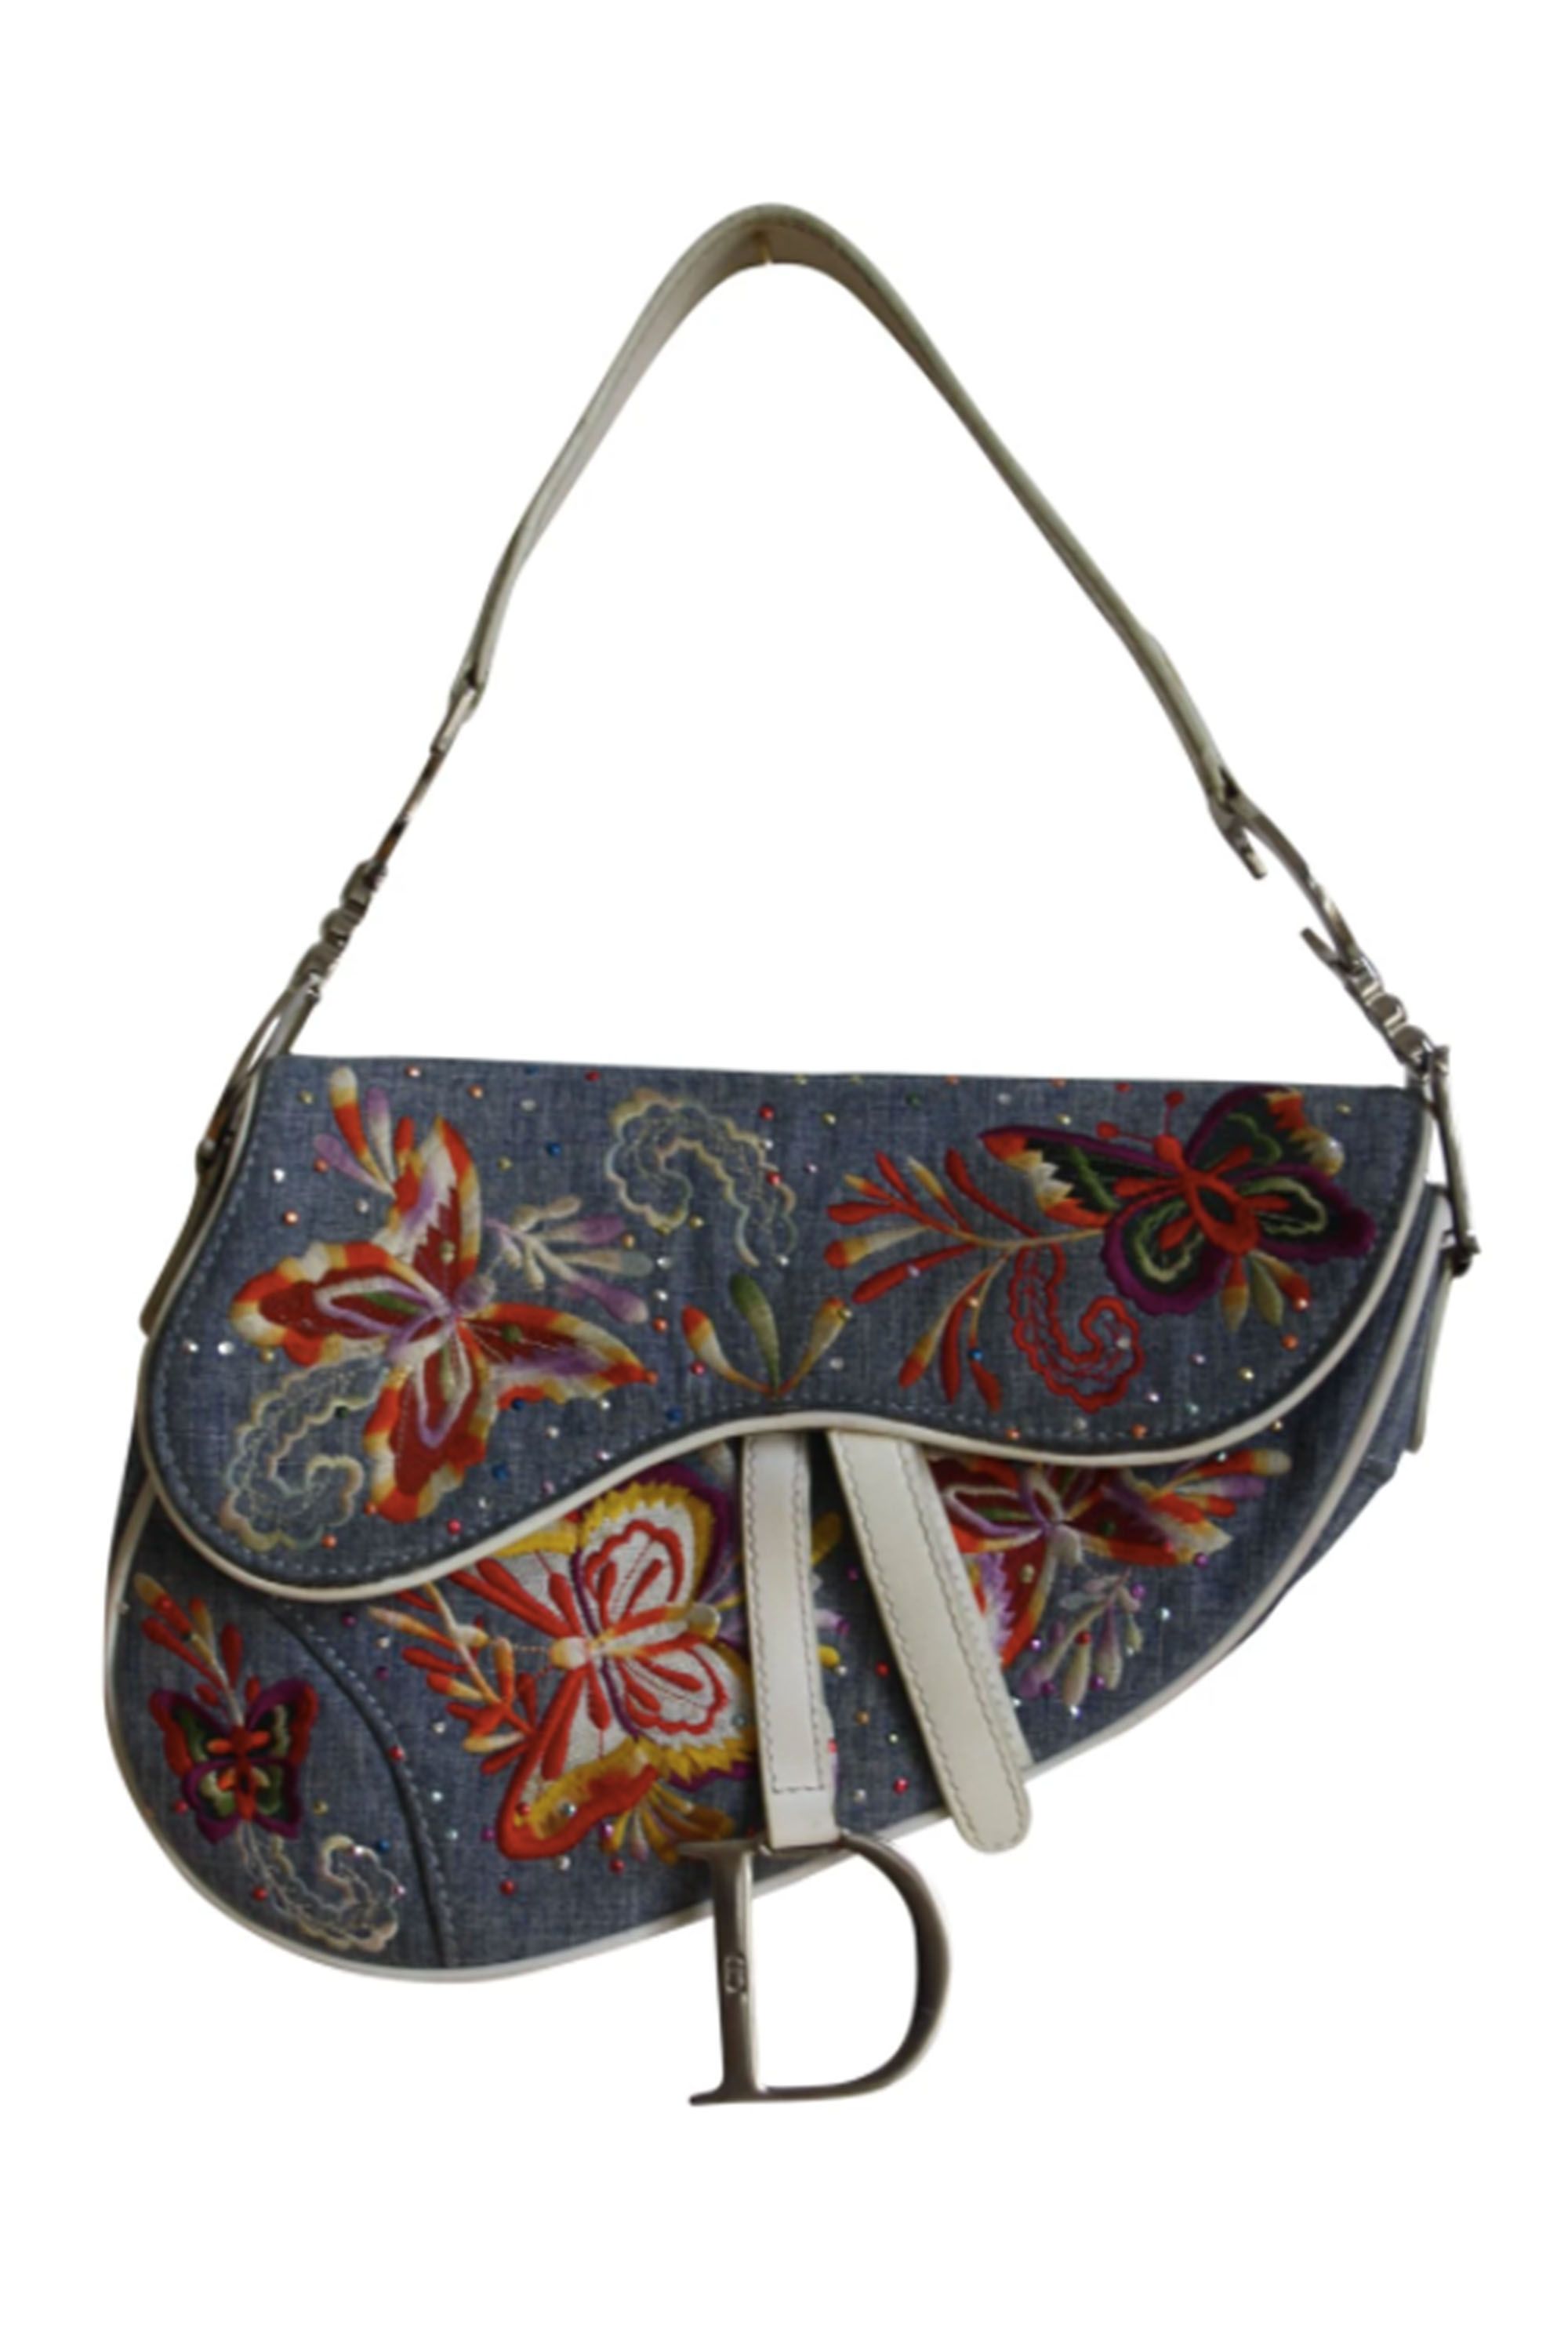 Dior's iconic saddle bag from the noughties is back, London Evening  Standard